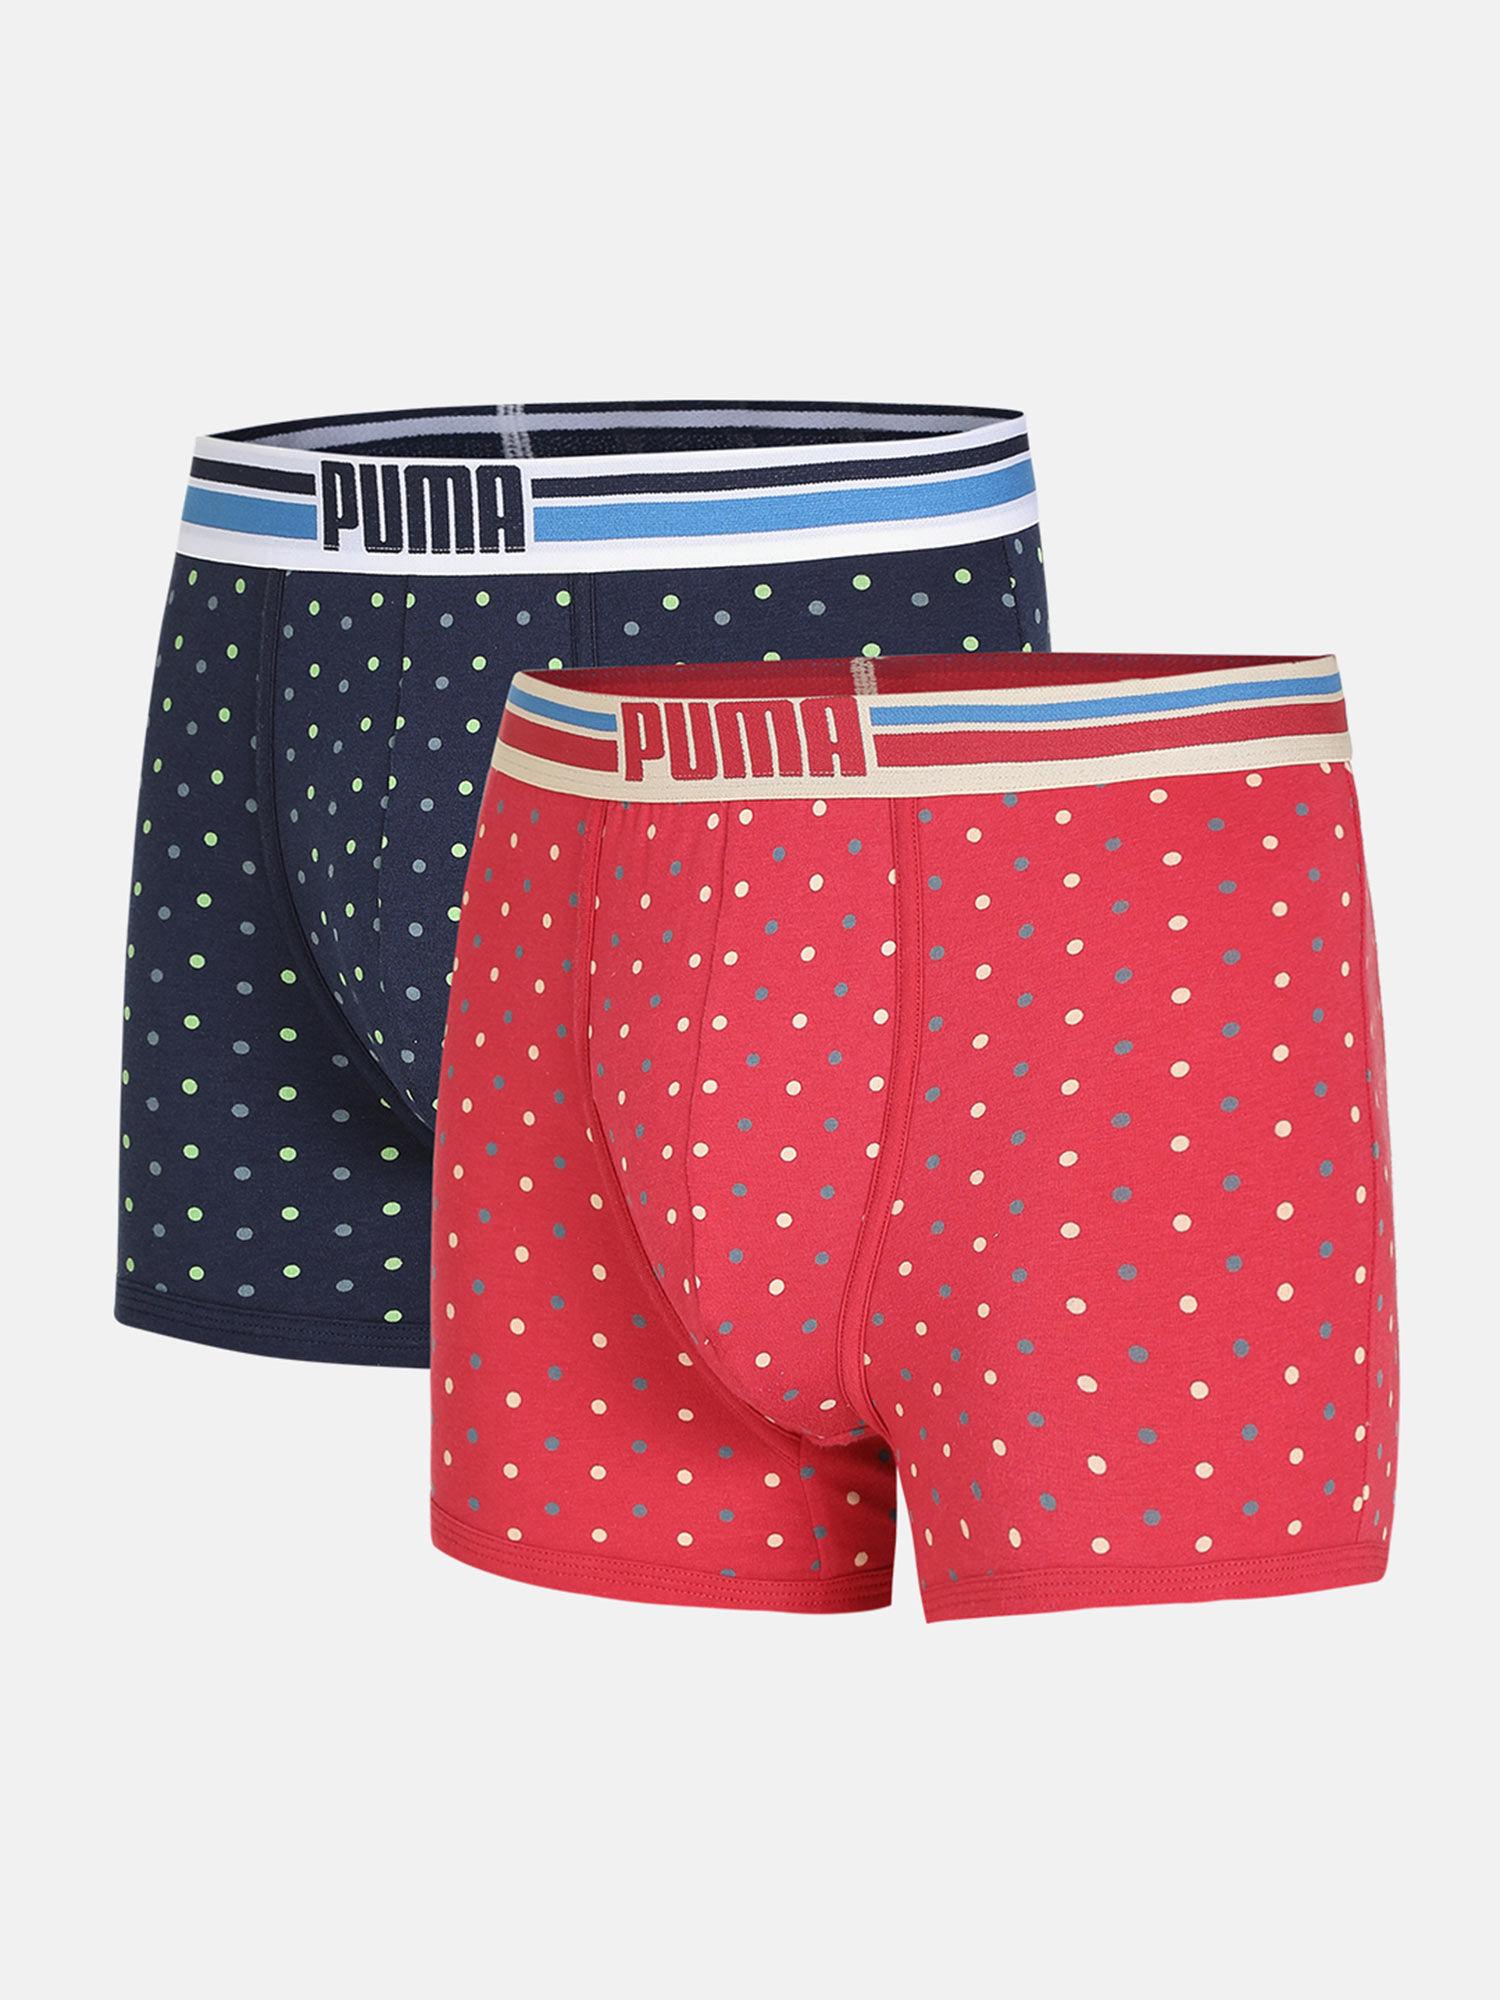 red-&-navy-blue-stretch-polka-trunks-(pack-of-2)